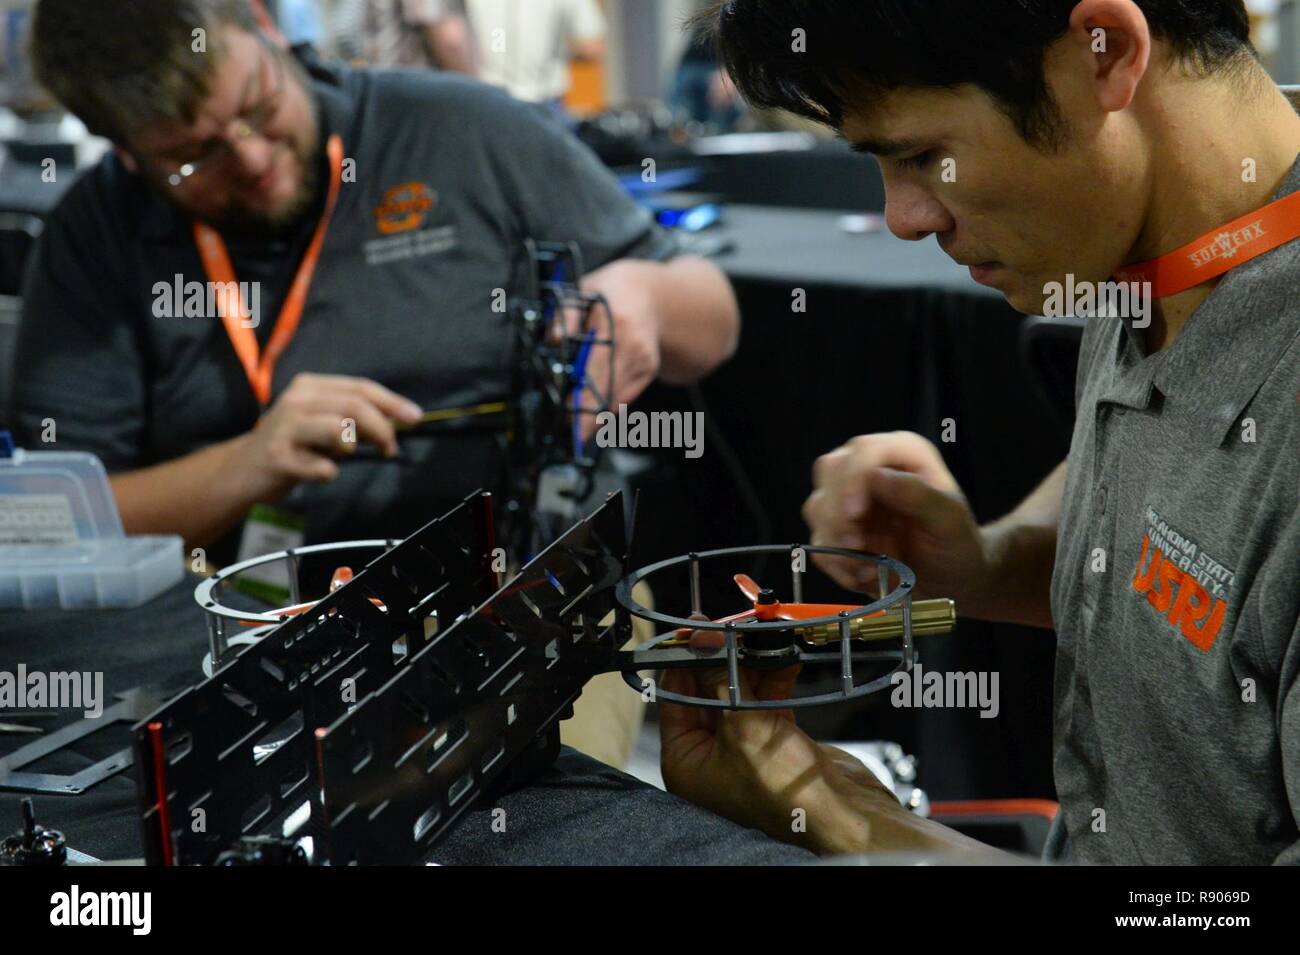 Dillon Nelson, right, and Dane Johnson, research engineers from the Oklahoma State University Unmanned Systems Research Institute, assemble collision resistant drones during the ThunderDrone Rodeo at the newest SOFWERX facility in Tampa, Fla., Nov. 1, 2017. ThunderDrone is a U.S. Special Operations Command initiative dedicated to drone prototyping, which focuses on exploring drone technologies through idea formation, testing, and demonstration. Stock Photo